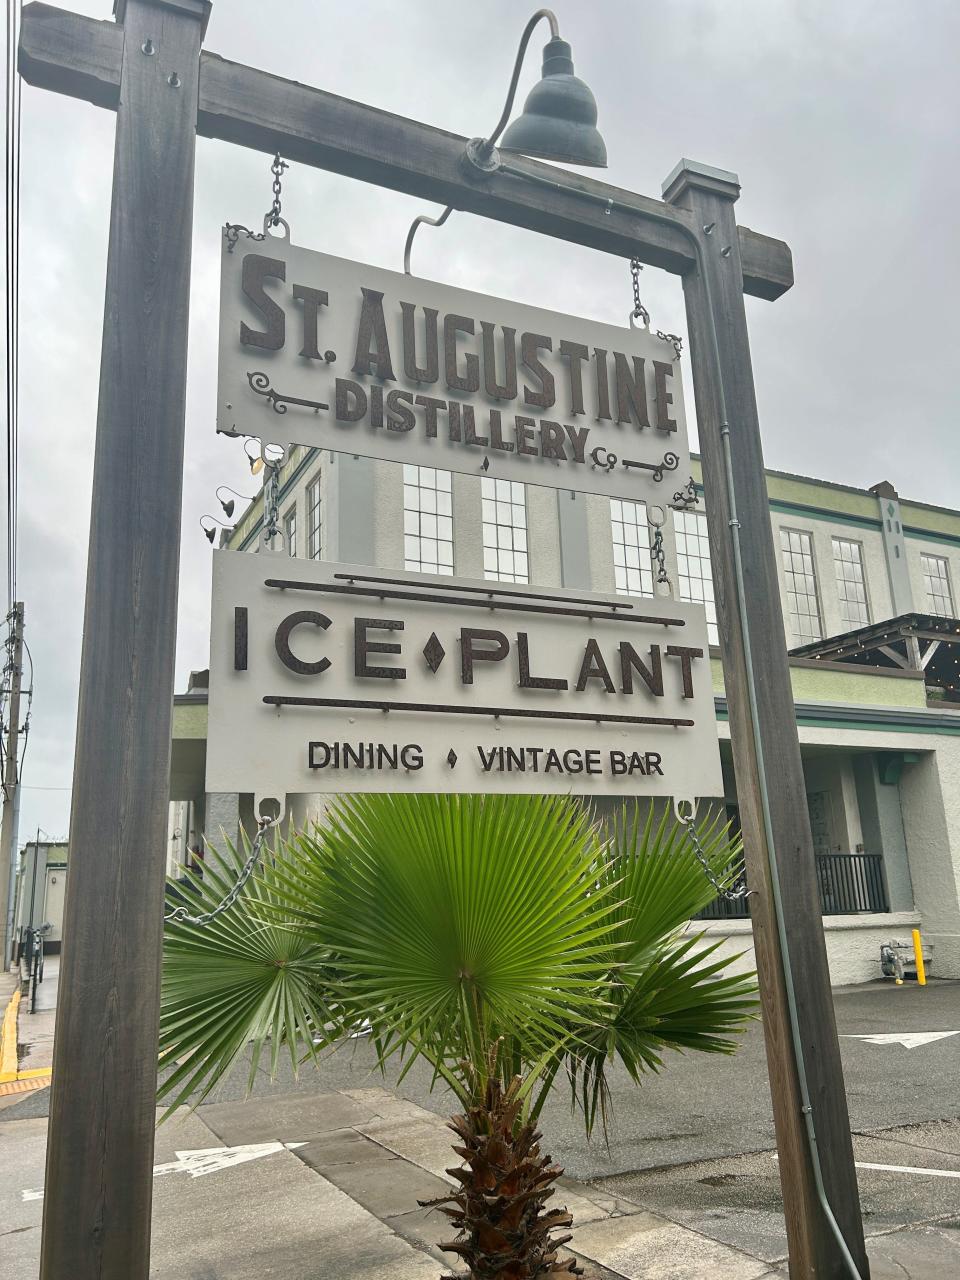 Ice Plant Bar and St. Augustine Distillery are located in an ice plant built in 1927.